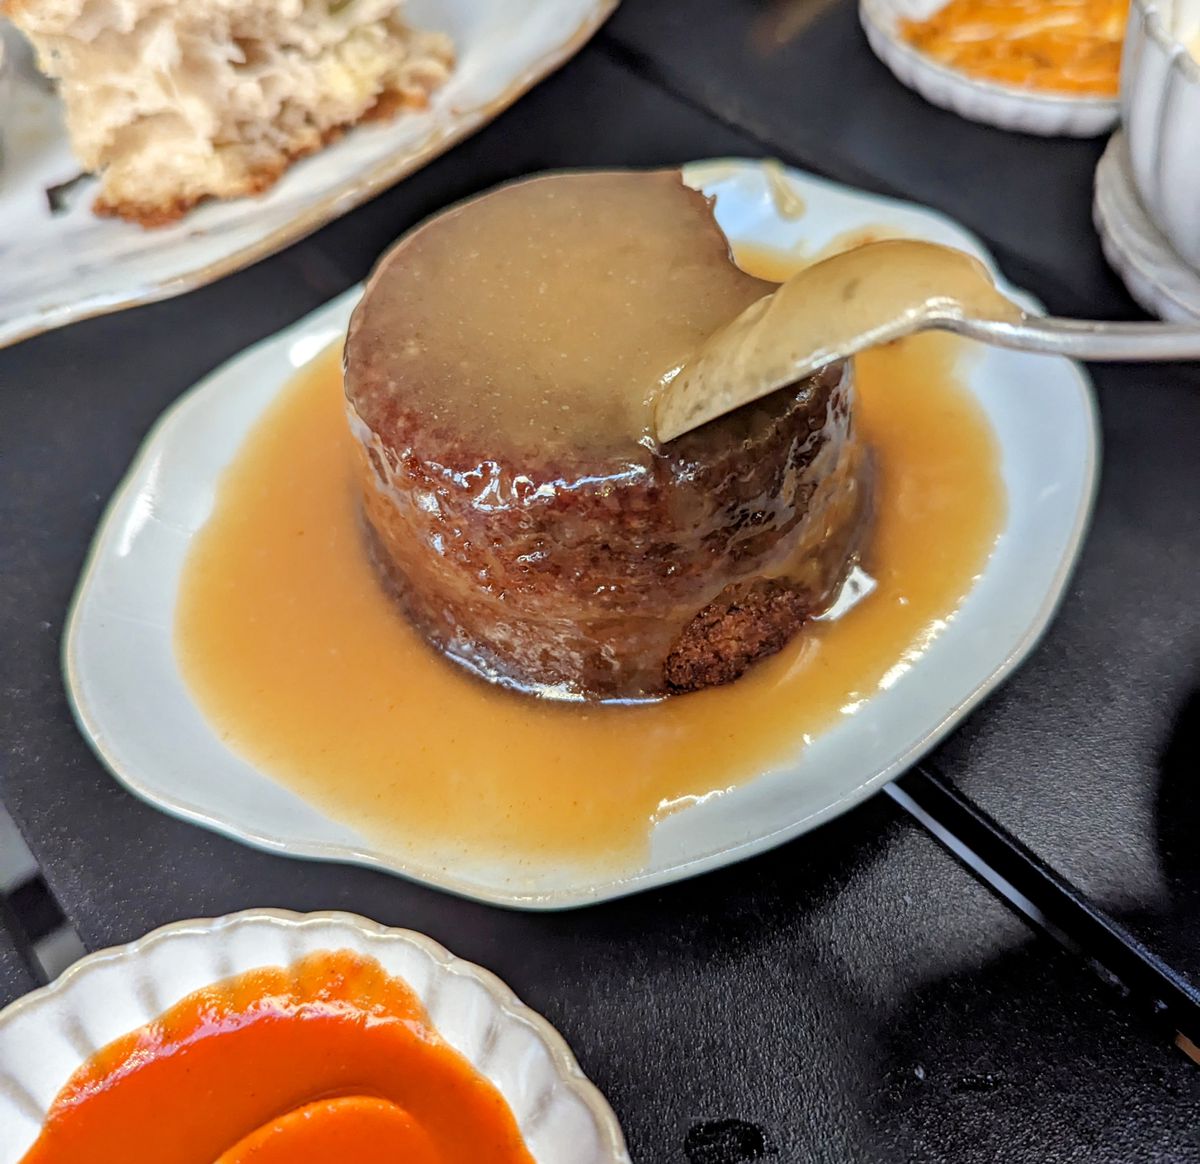 A sticky toffee pudding.